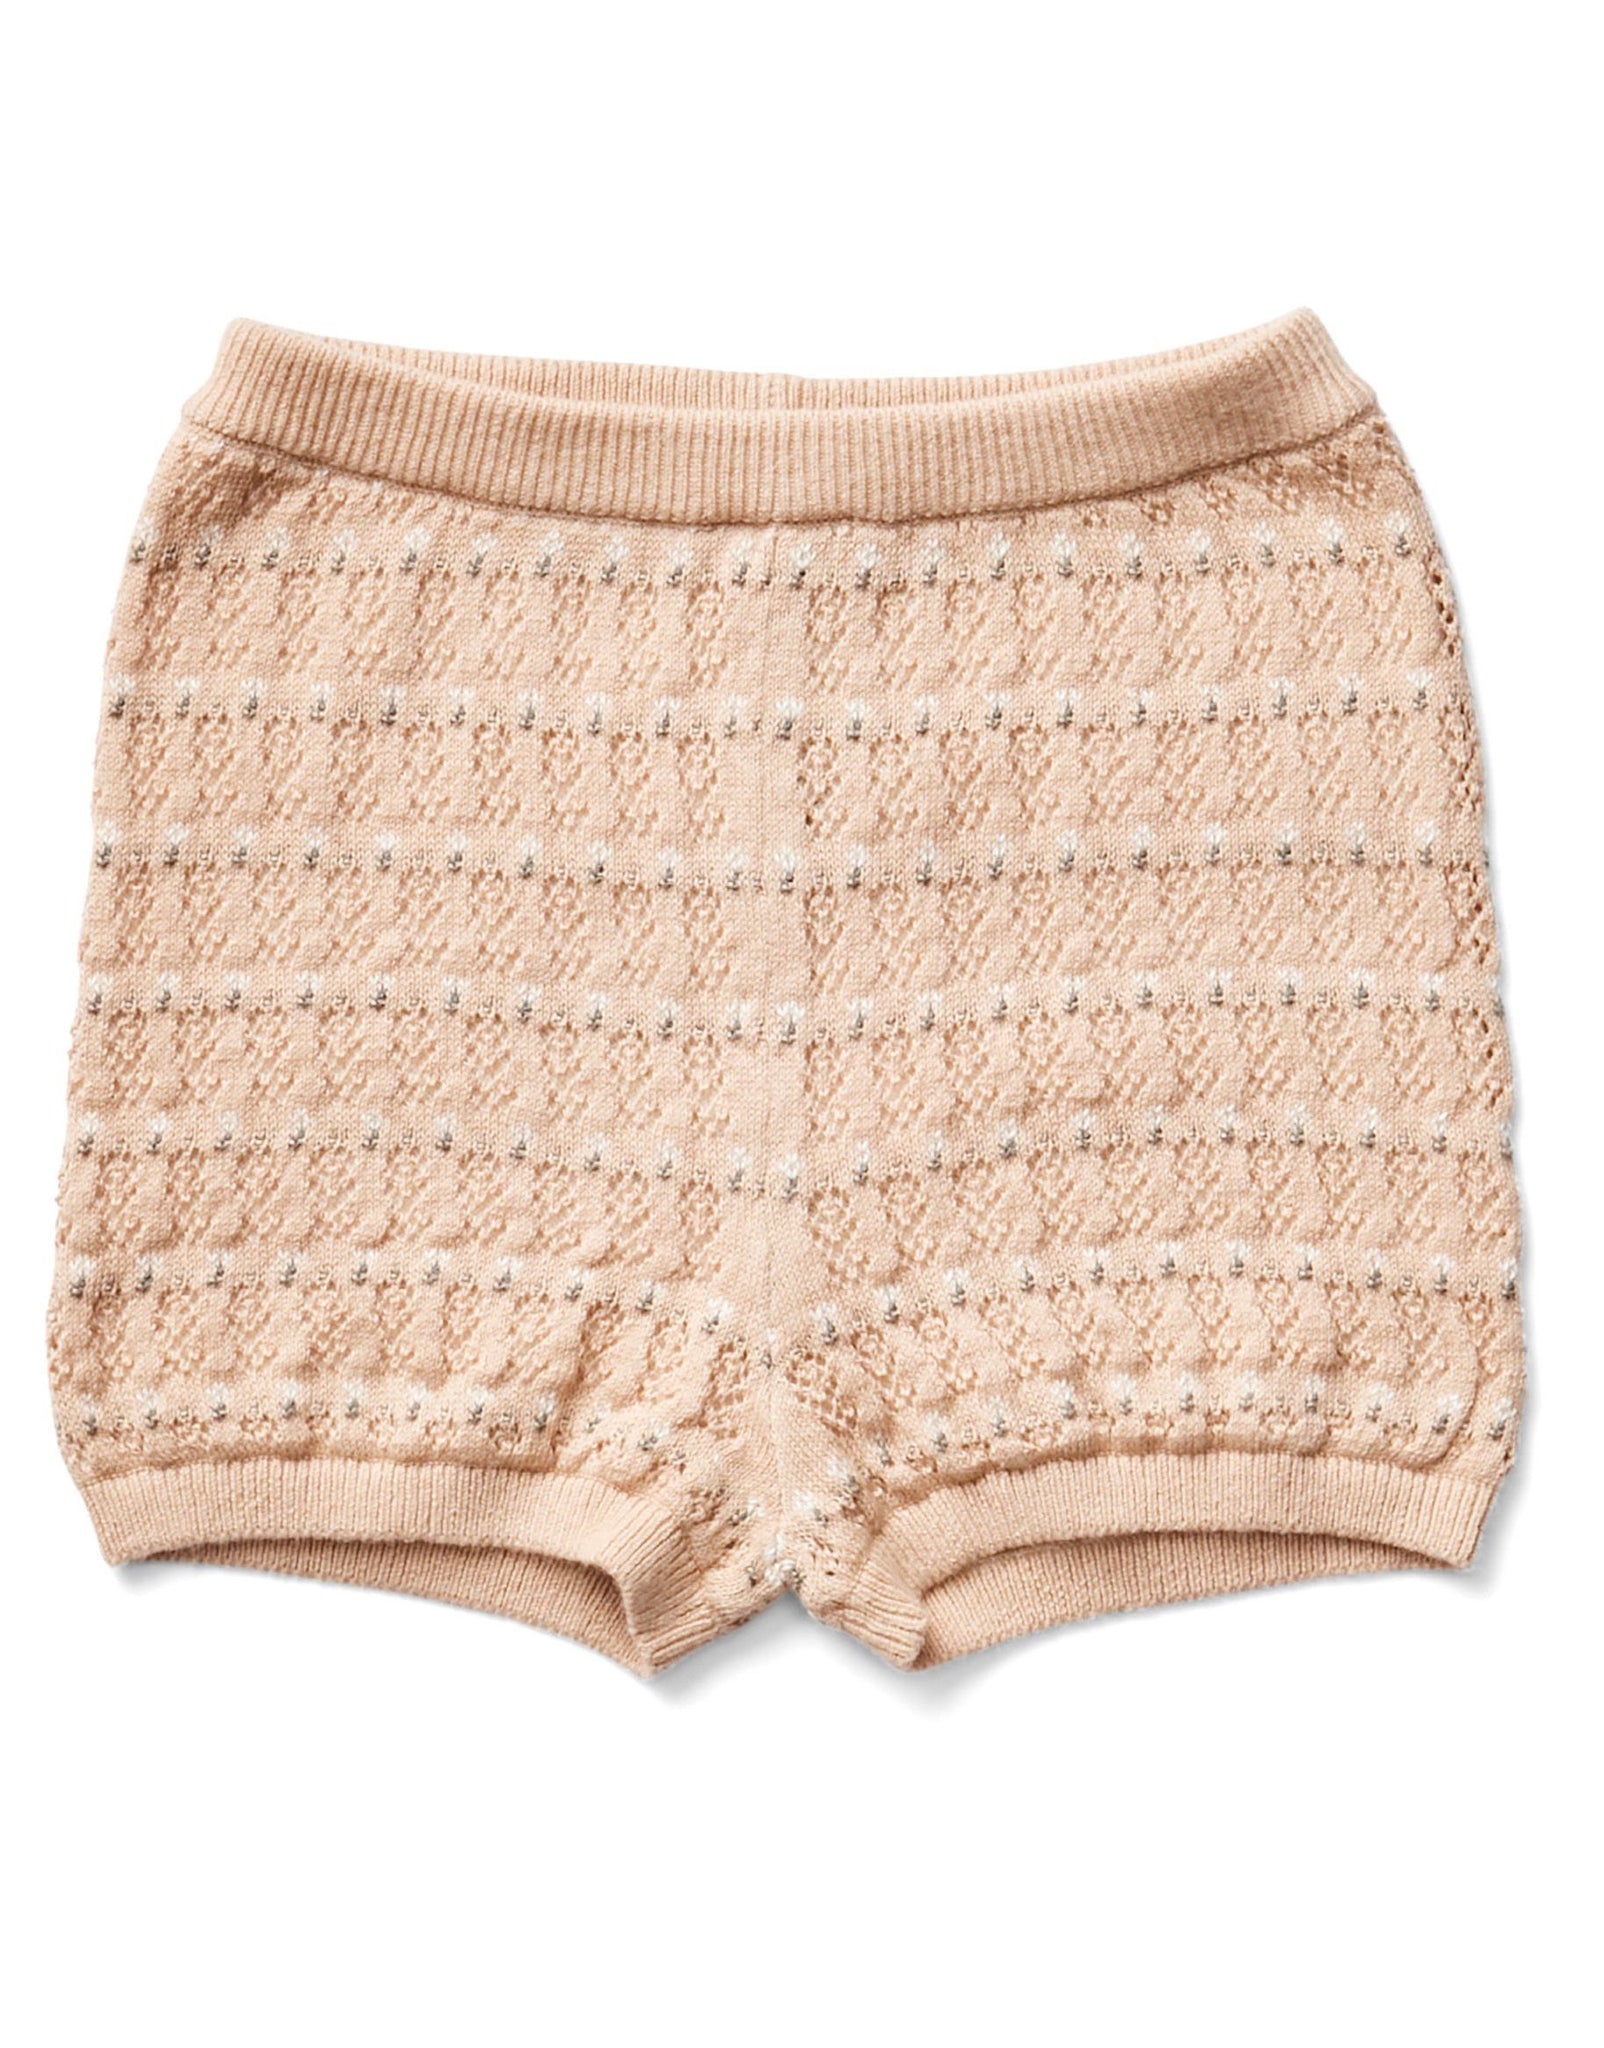 Lacey Shortie - Ginger *LAST ONE - SIZE 2*